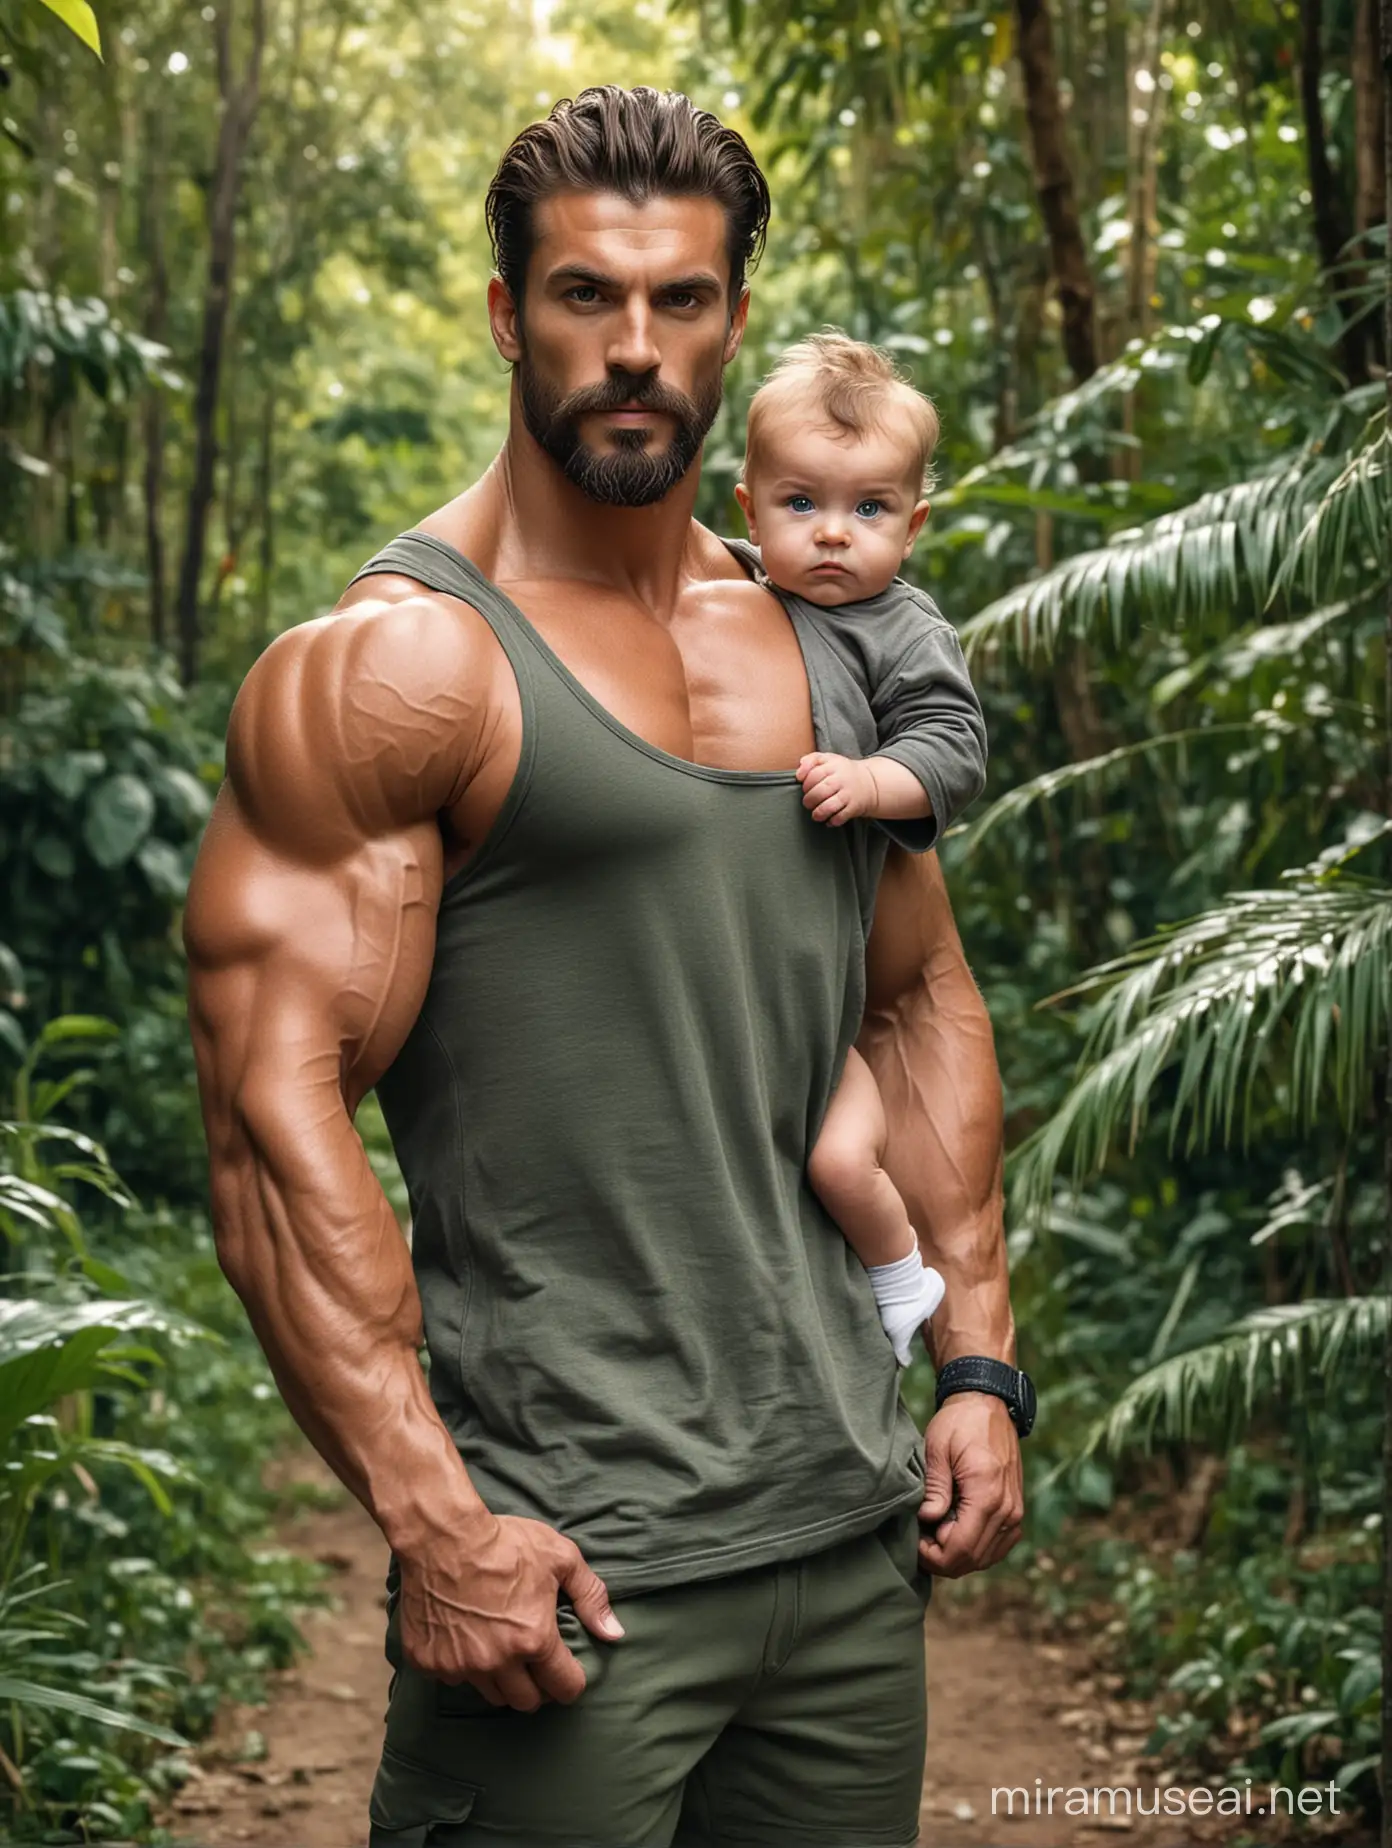 Tall and handsome bodybuilder men with beautiful hairstyle and beard with attractive eyes and Big wide shoulder and chest carrying a little baby on his arms standing in jungle 